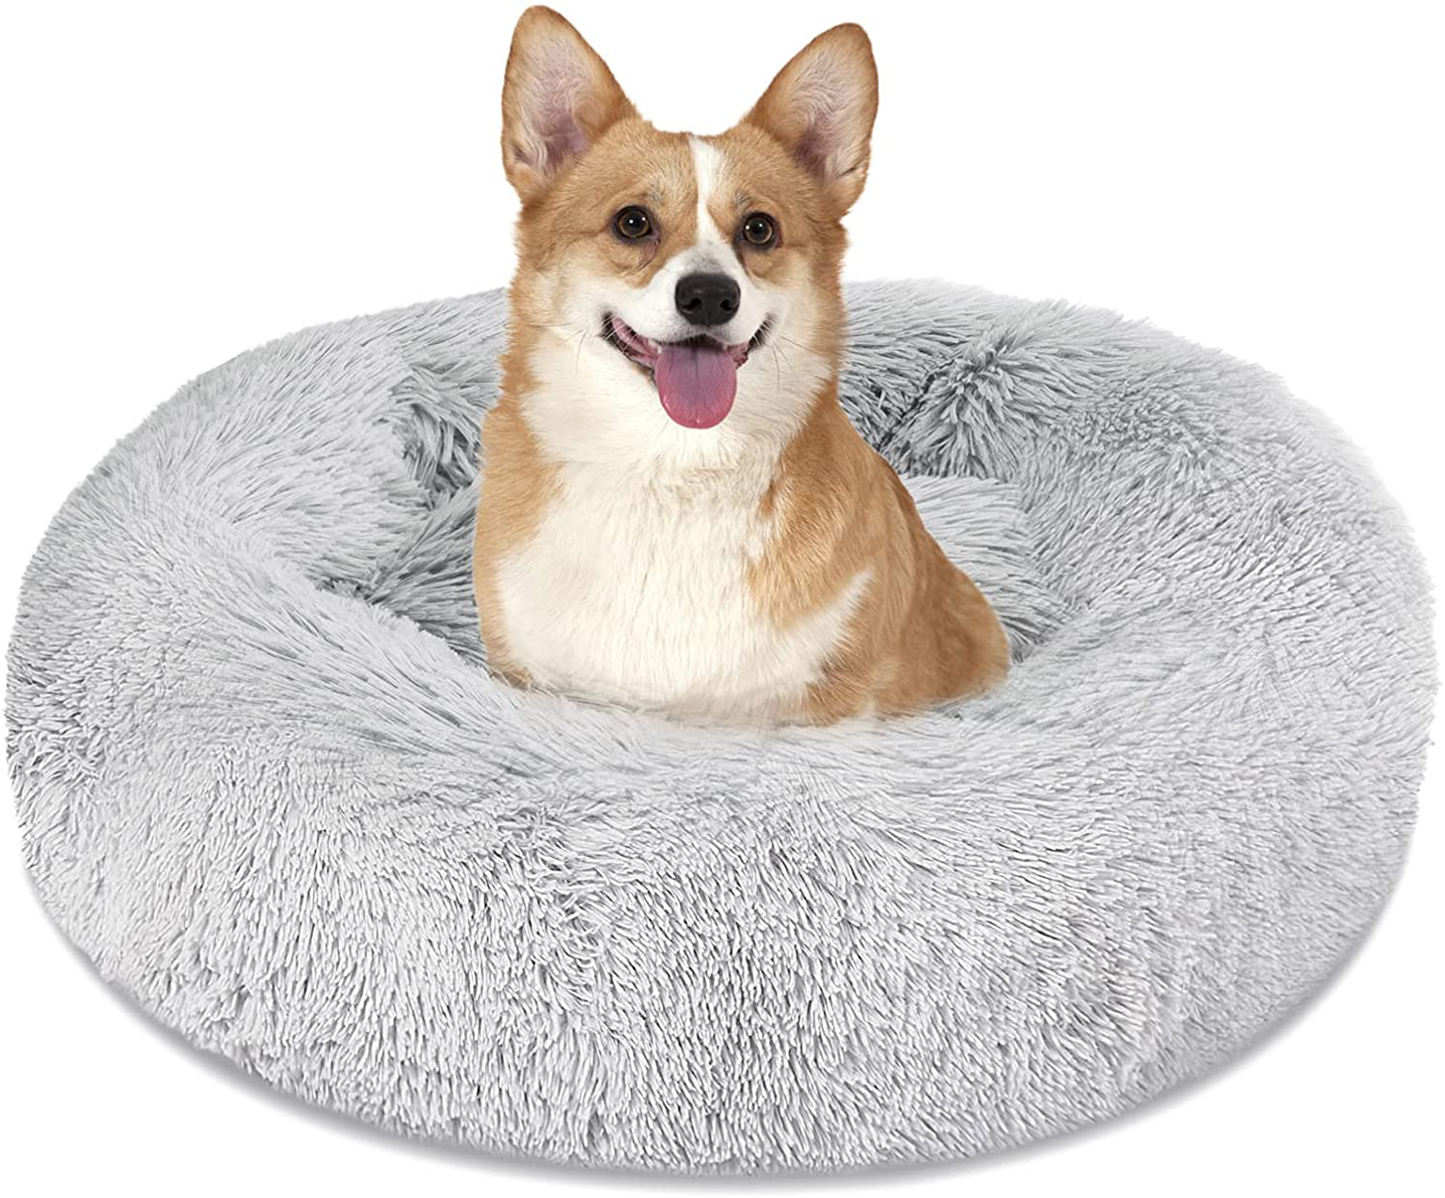 Calming Dog Bed Cat Bed, Washable round Dog Bed - 23/30/36 Inches Anti-Slip Faux Fur Donut Cuddler Cat Bed for Small Medium Large Dogs - Fits up to 25/45/100 Lbs - Waterproof Bottom